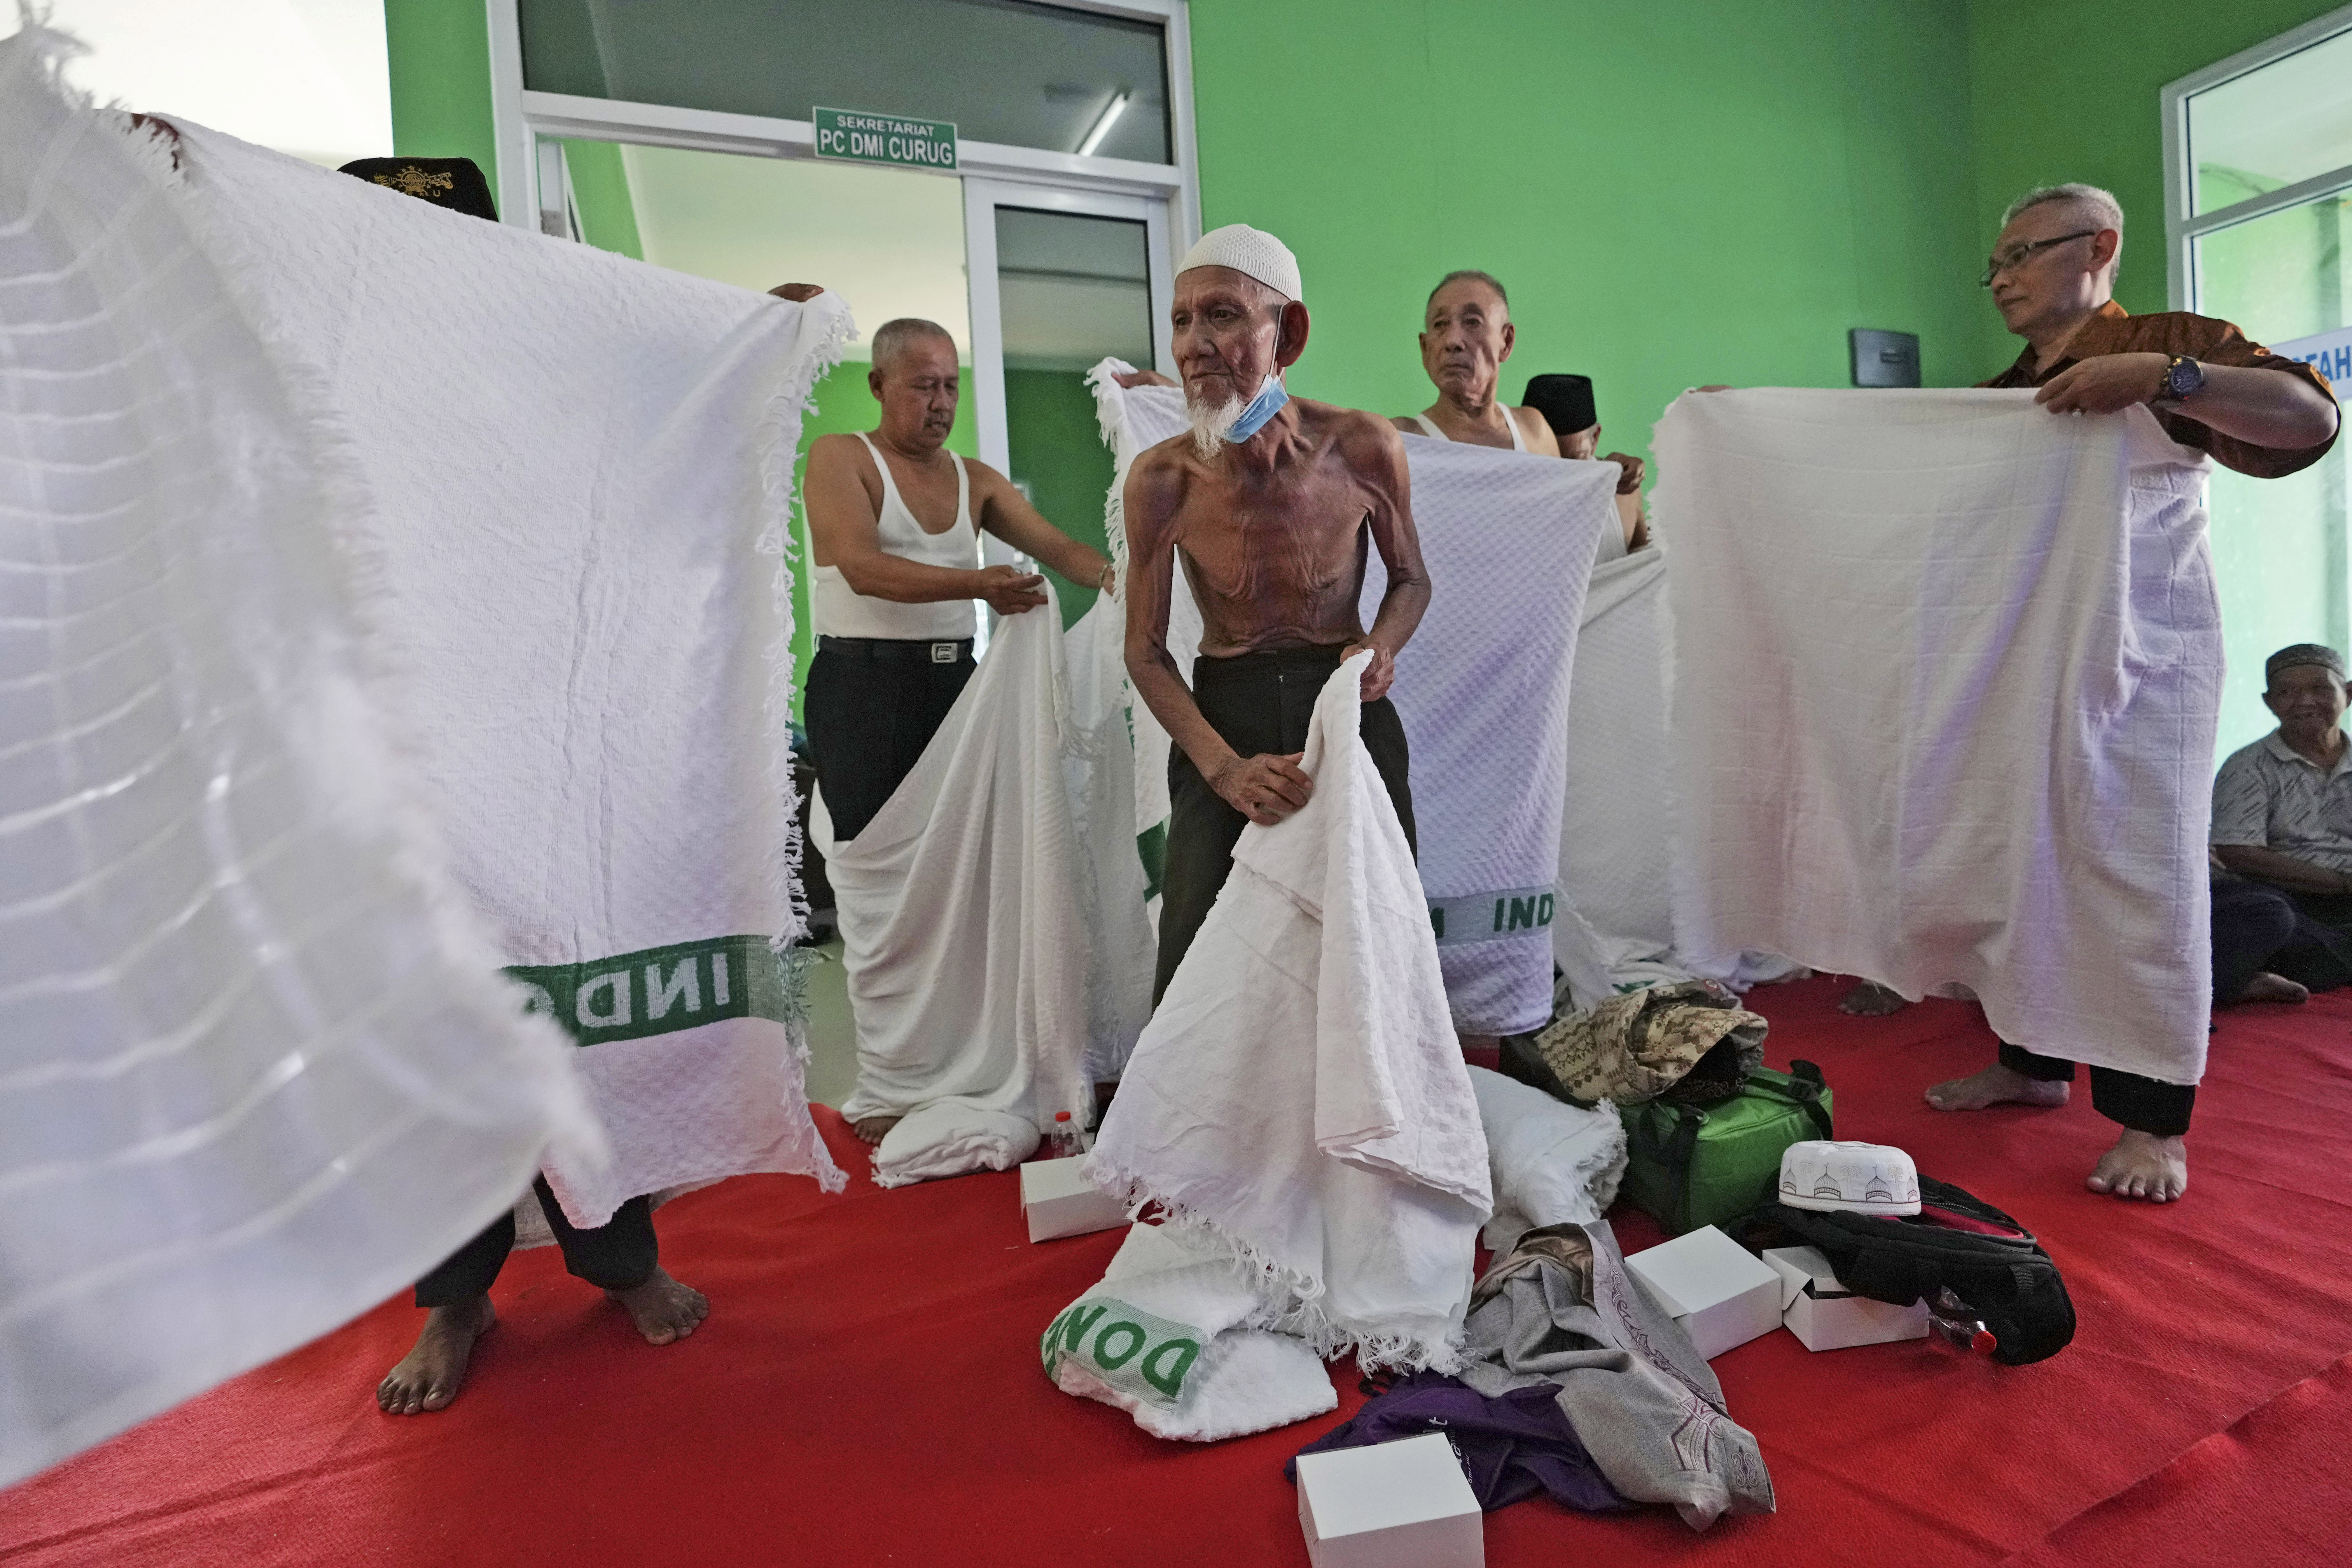 Husin bin Nisan, center, with other worshippers, prepares to wear a special garb called "ihram," typically worn during hajj pilgrimage, prior to a hajj rehearsal in Tangerang, Indonesia, Monday, May 15, 2023. After spending more than three decades picking tips from motorists, the 85-year-old volunteer traffic attendant is finally realizing his dream to go to the Islamic holy cities of Mecca and Medina for hajj pilgrimage (image: AP Photo/Achmad Ibrahim)